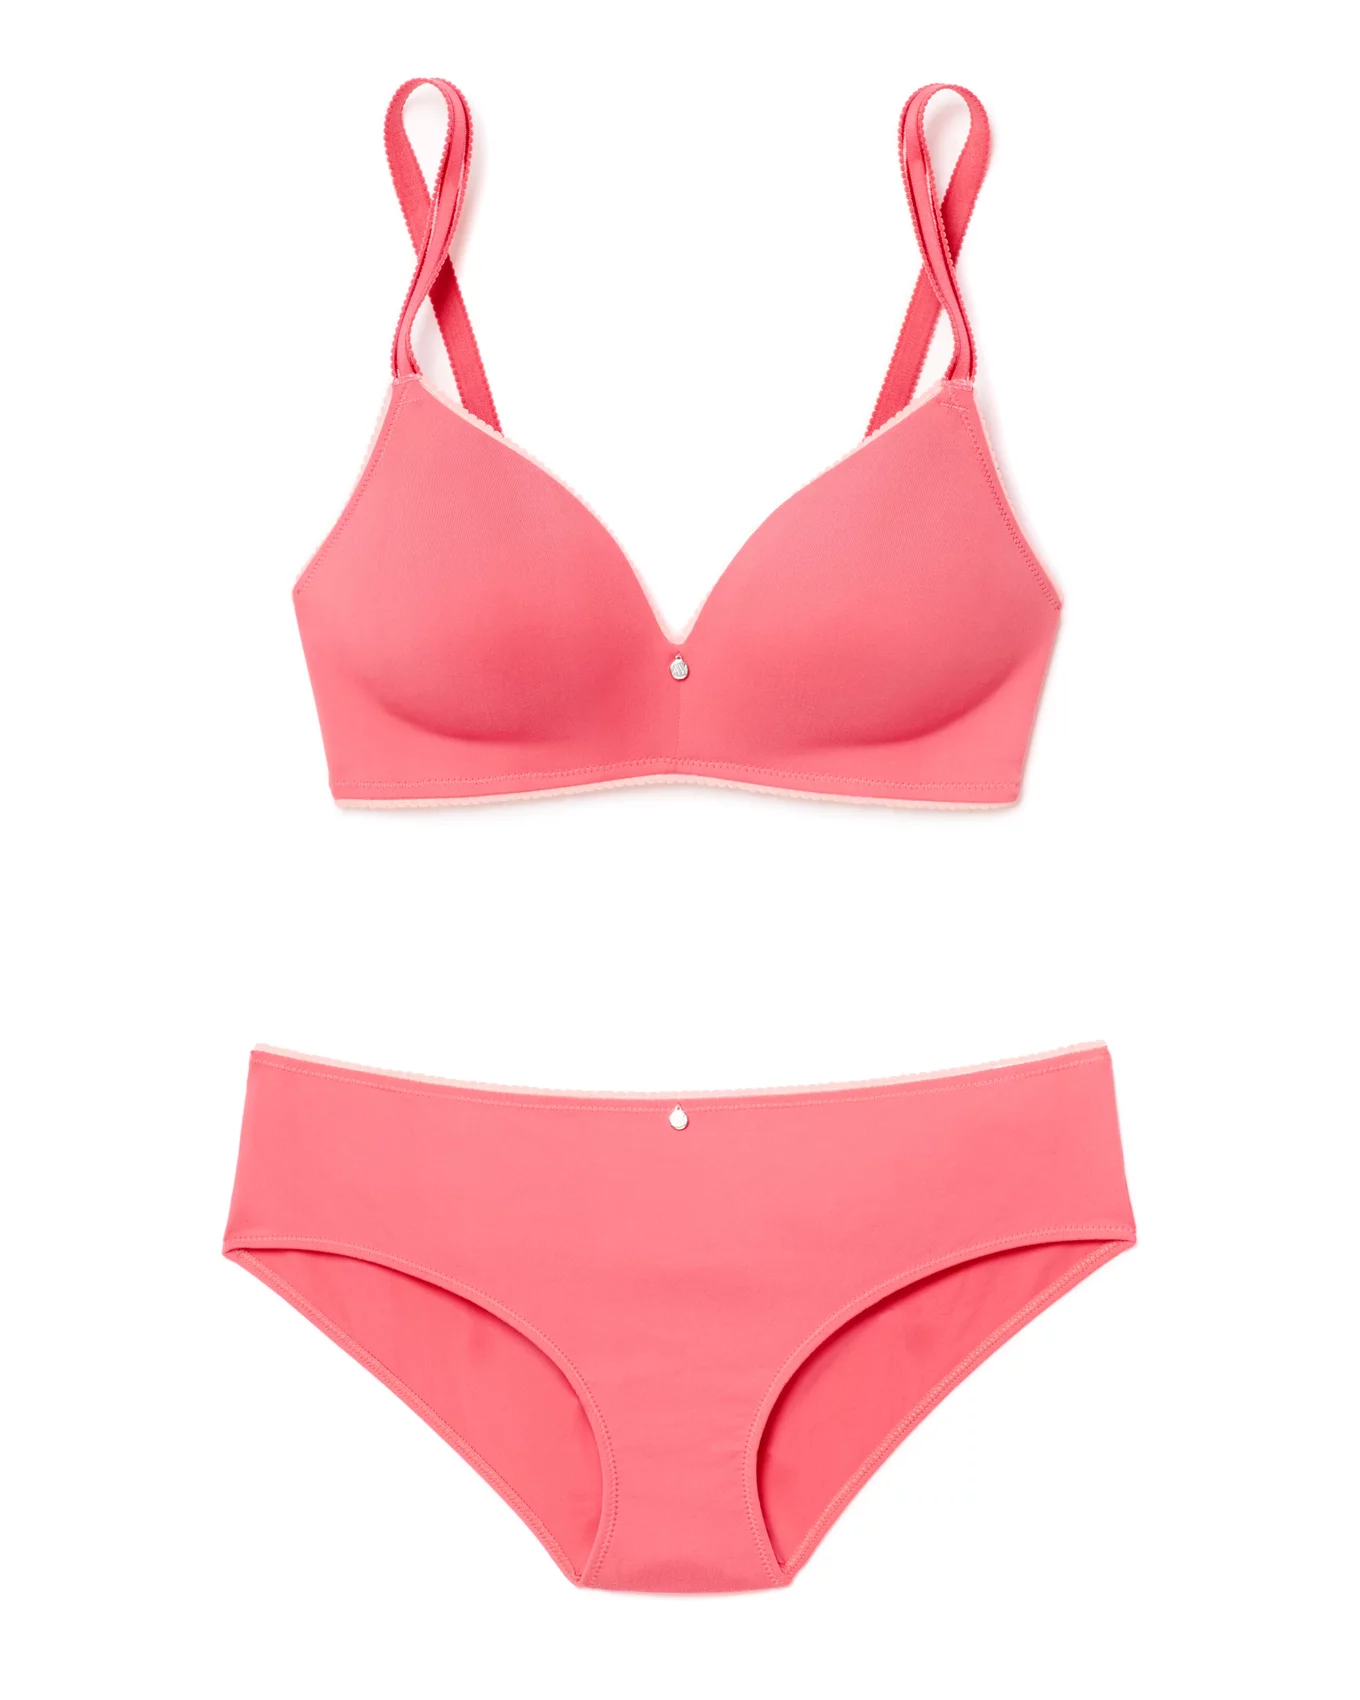 Bra And Panty Combo - Pink, 36b, Free at Rs 350/piece